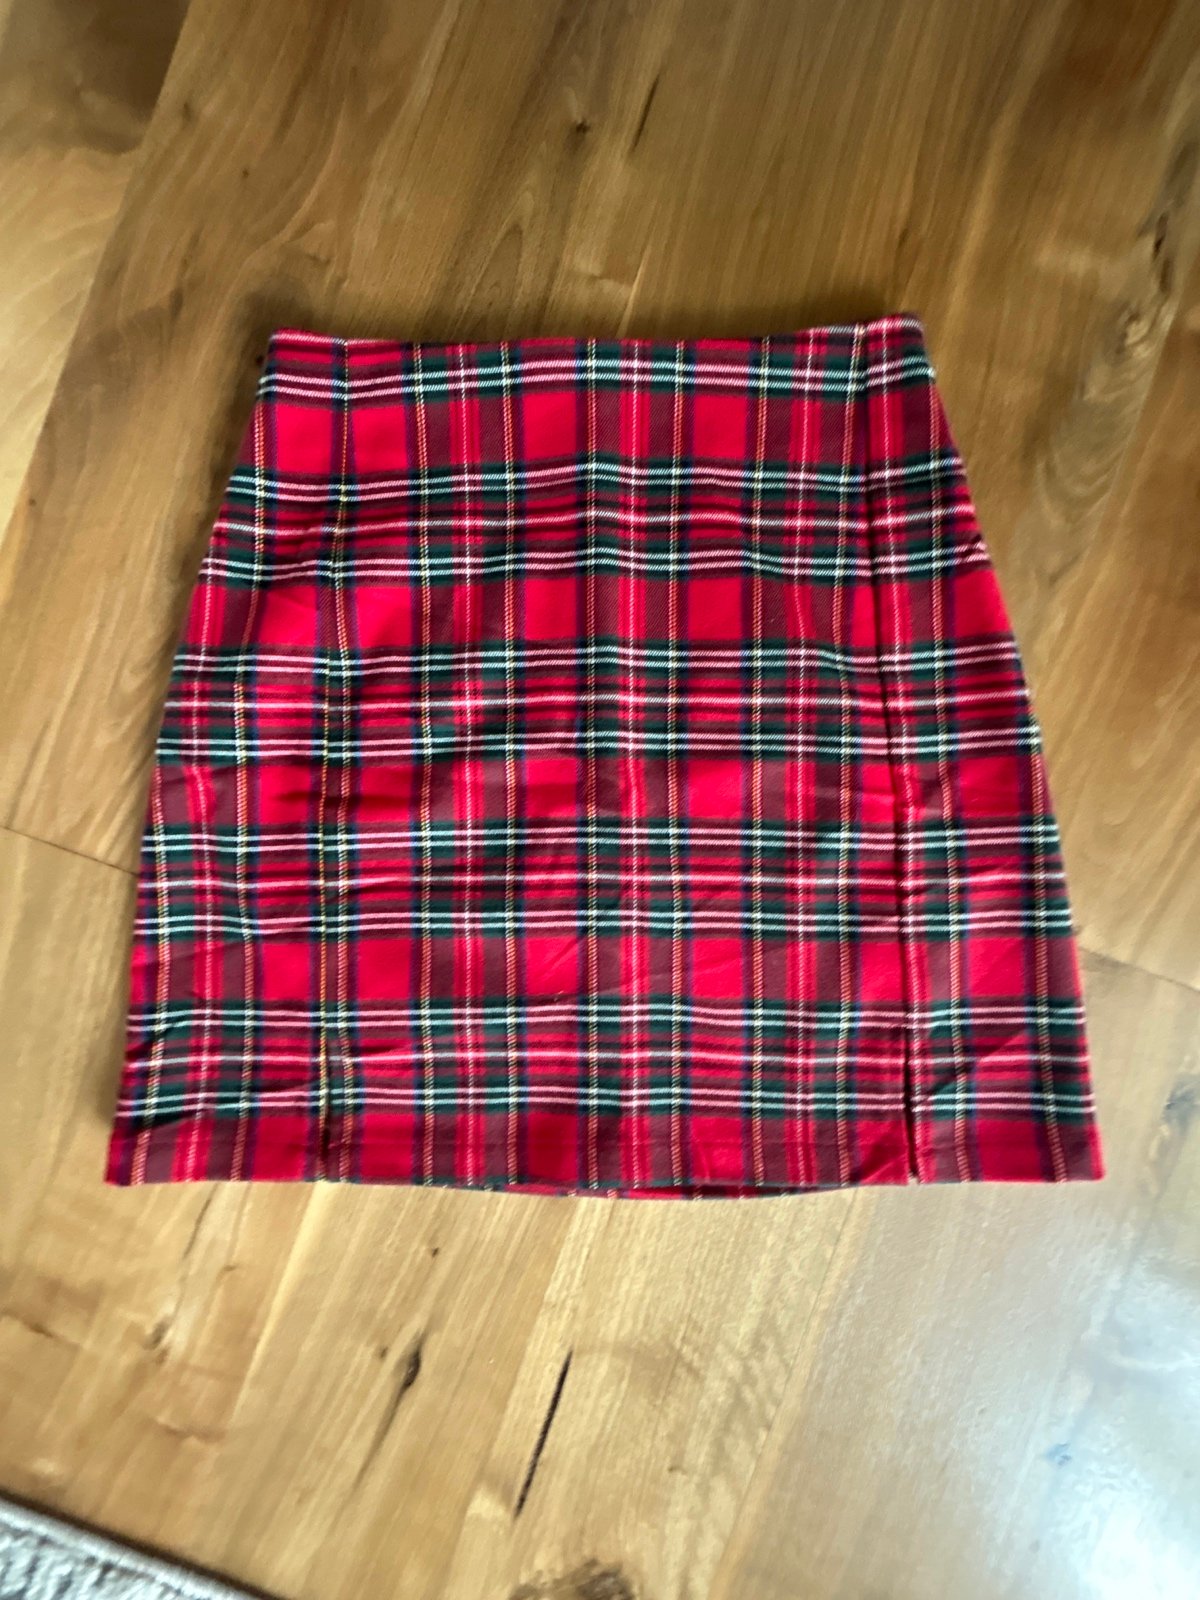 Simple Brandy Melville plaid skirt OhFcpYWr8 US Outlet